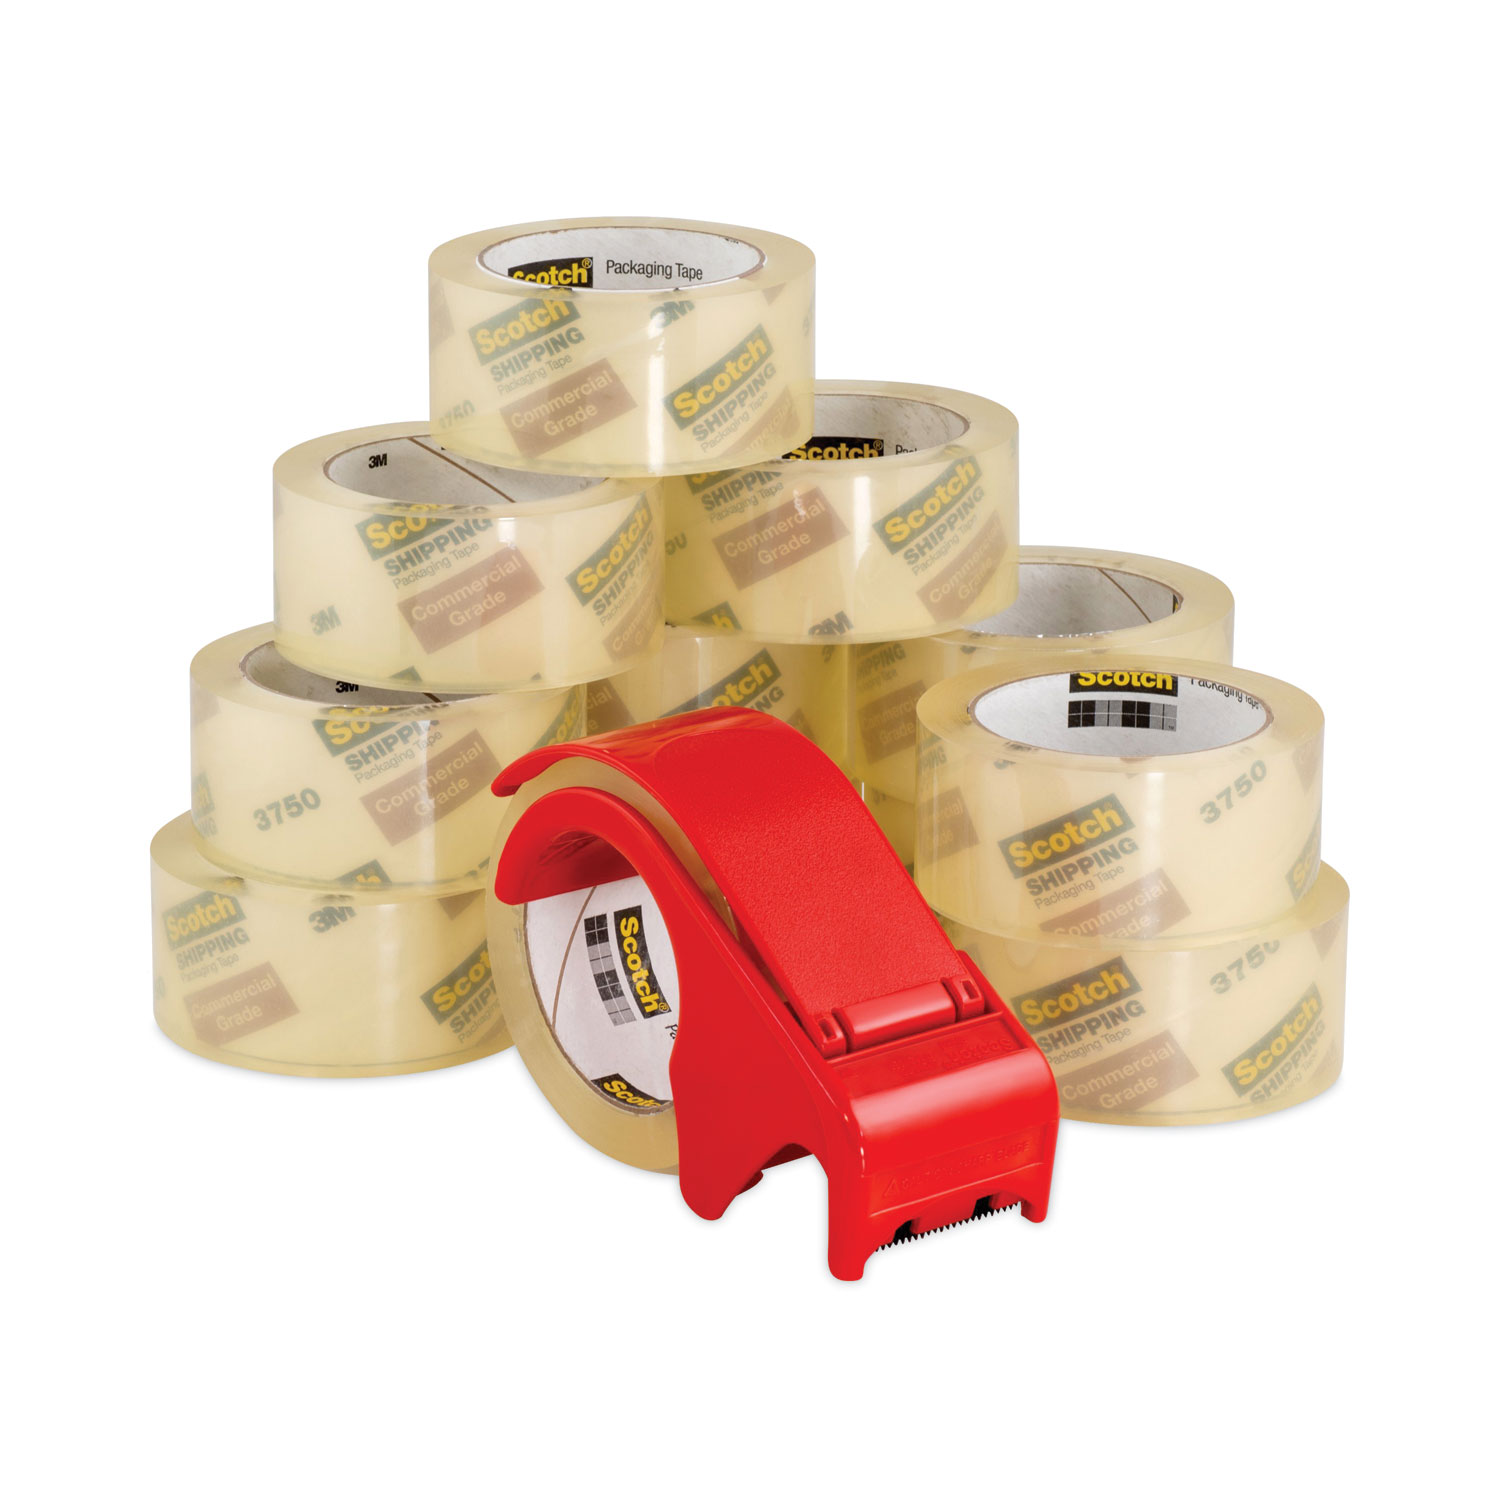 Packaging Tape Dispenser with Two Rolls of Tape, 3 Core, For